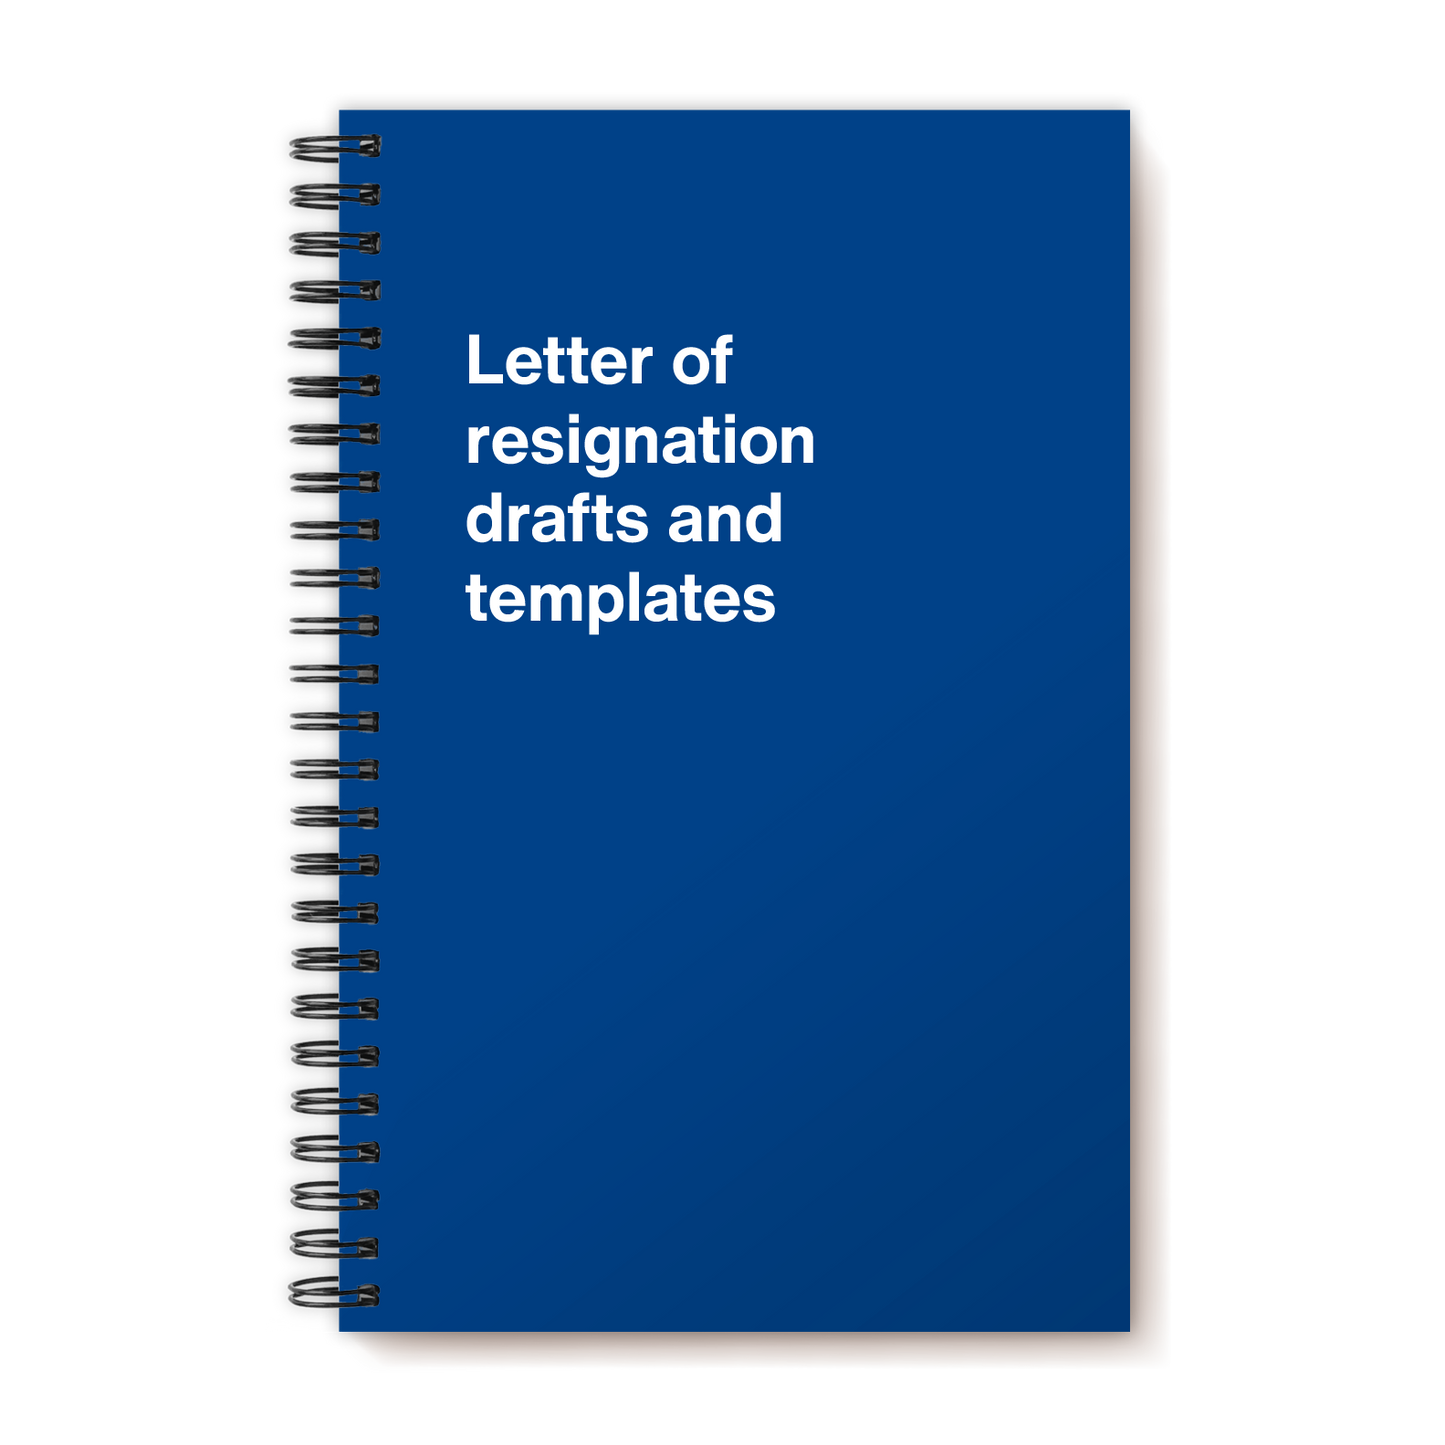 Letter of resignation drafts and templates | WTF Notebooks